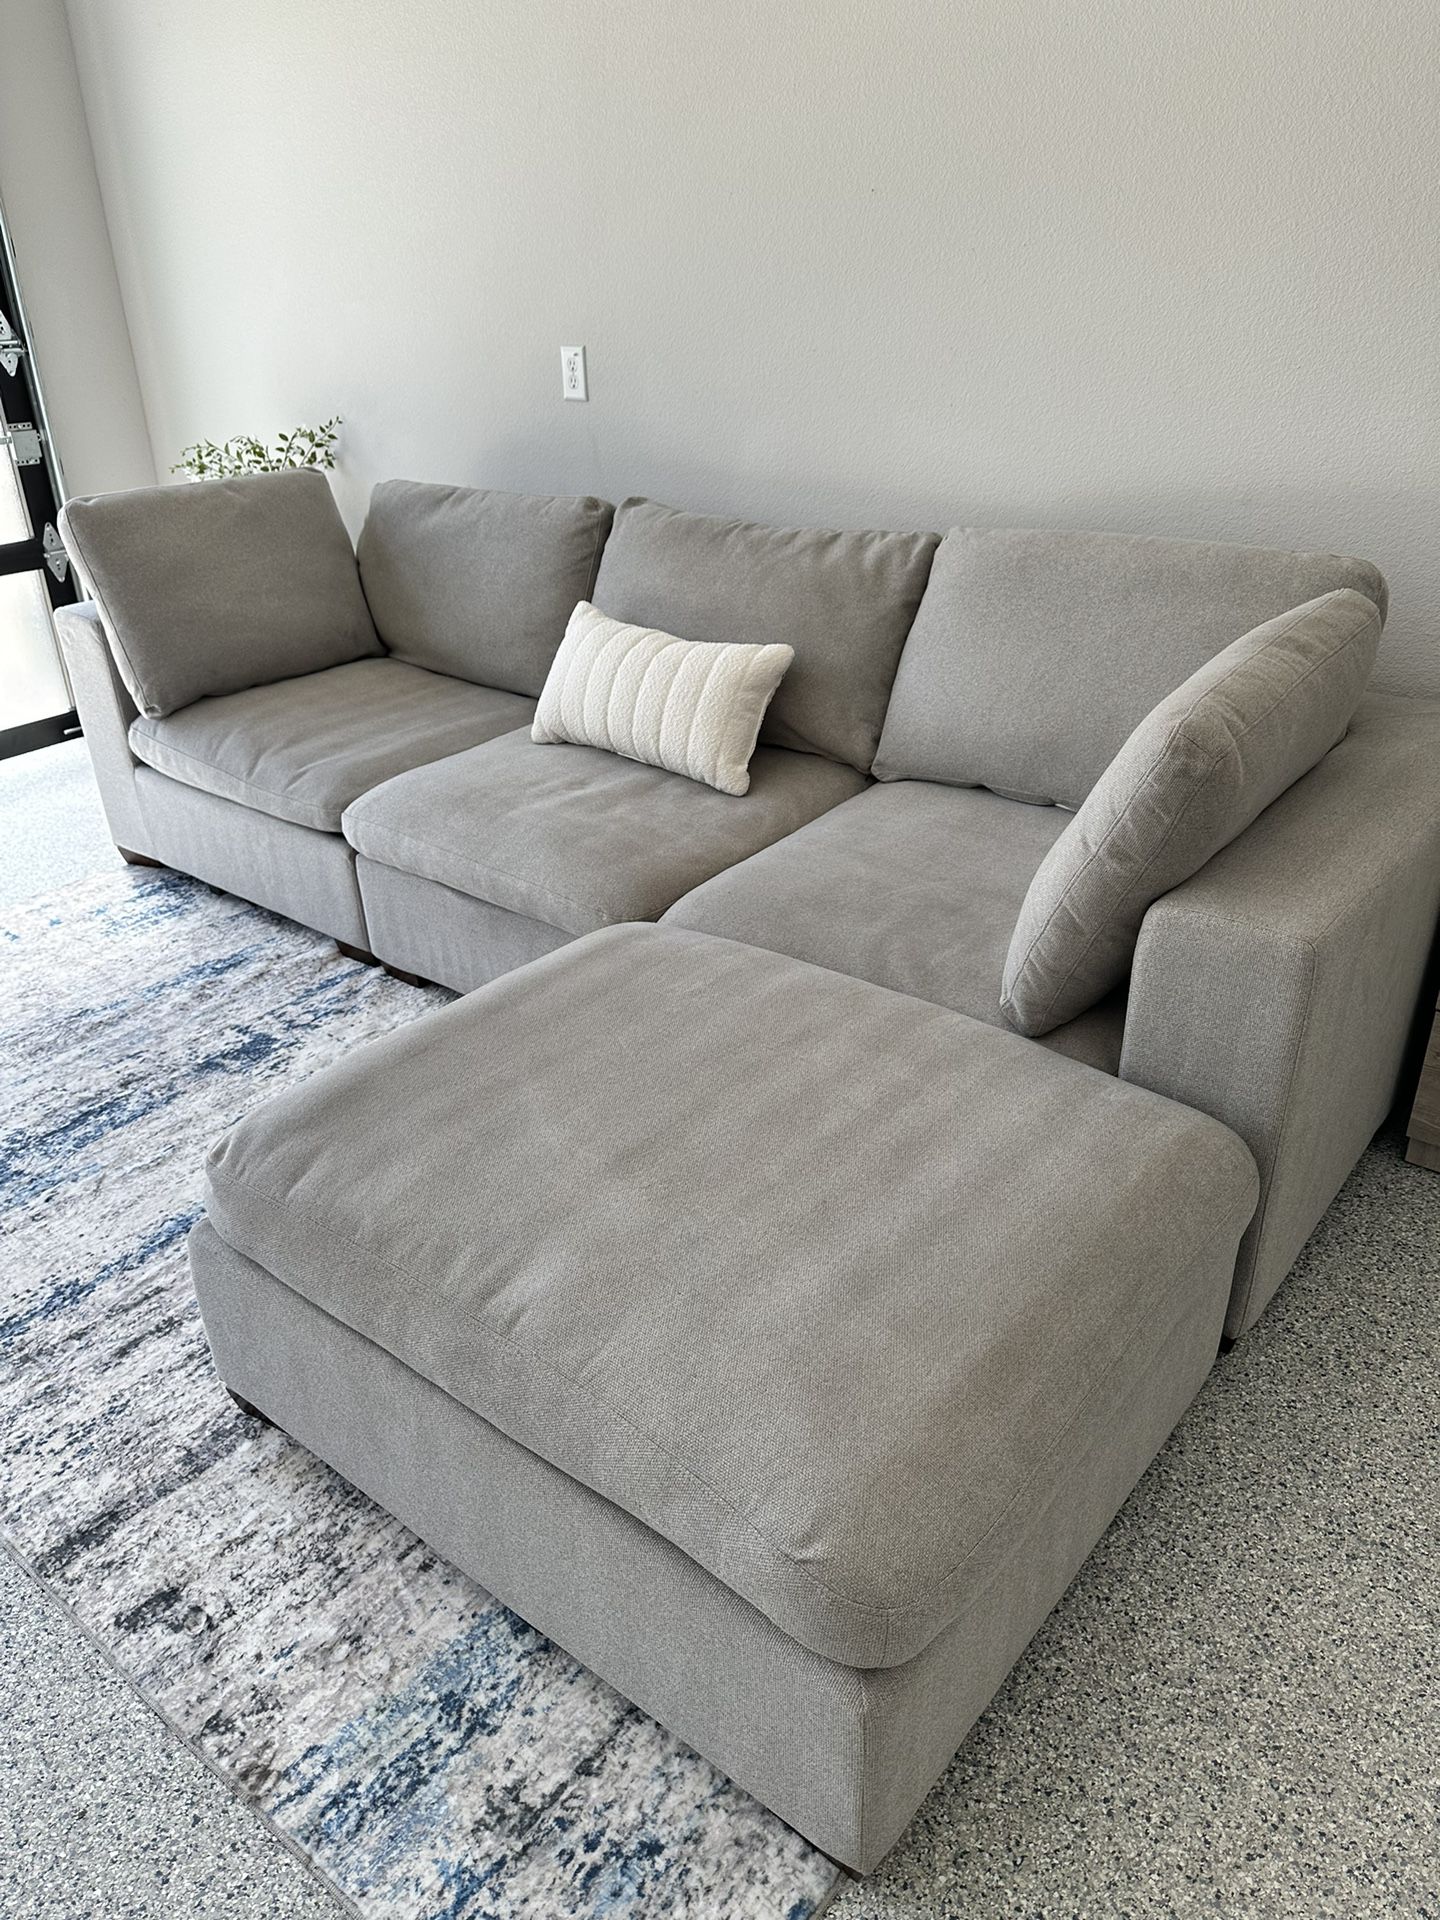 Modular Sectional Couch - Delivery Available